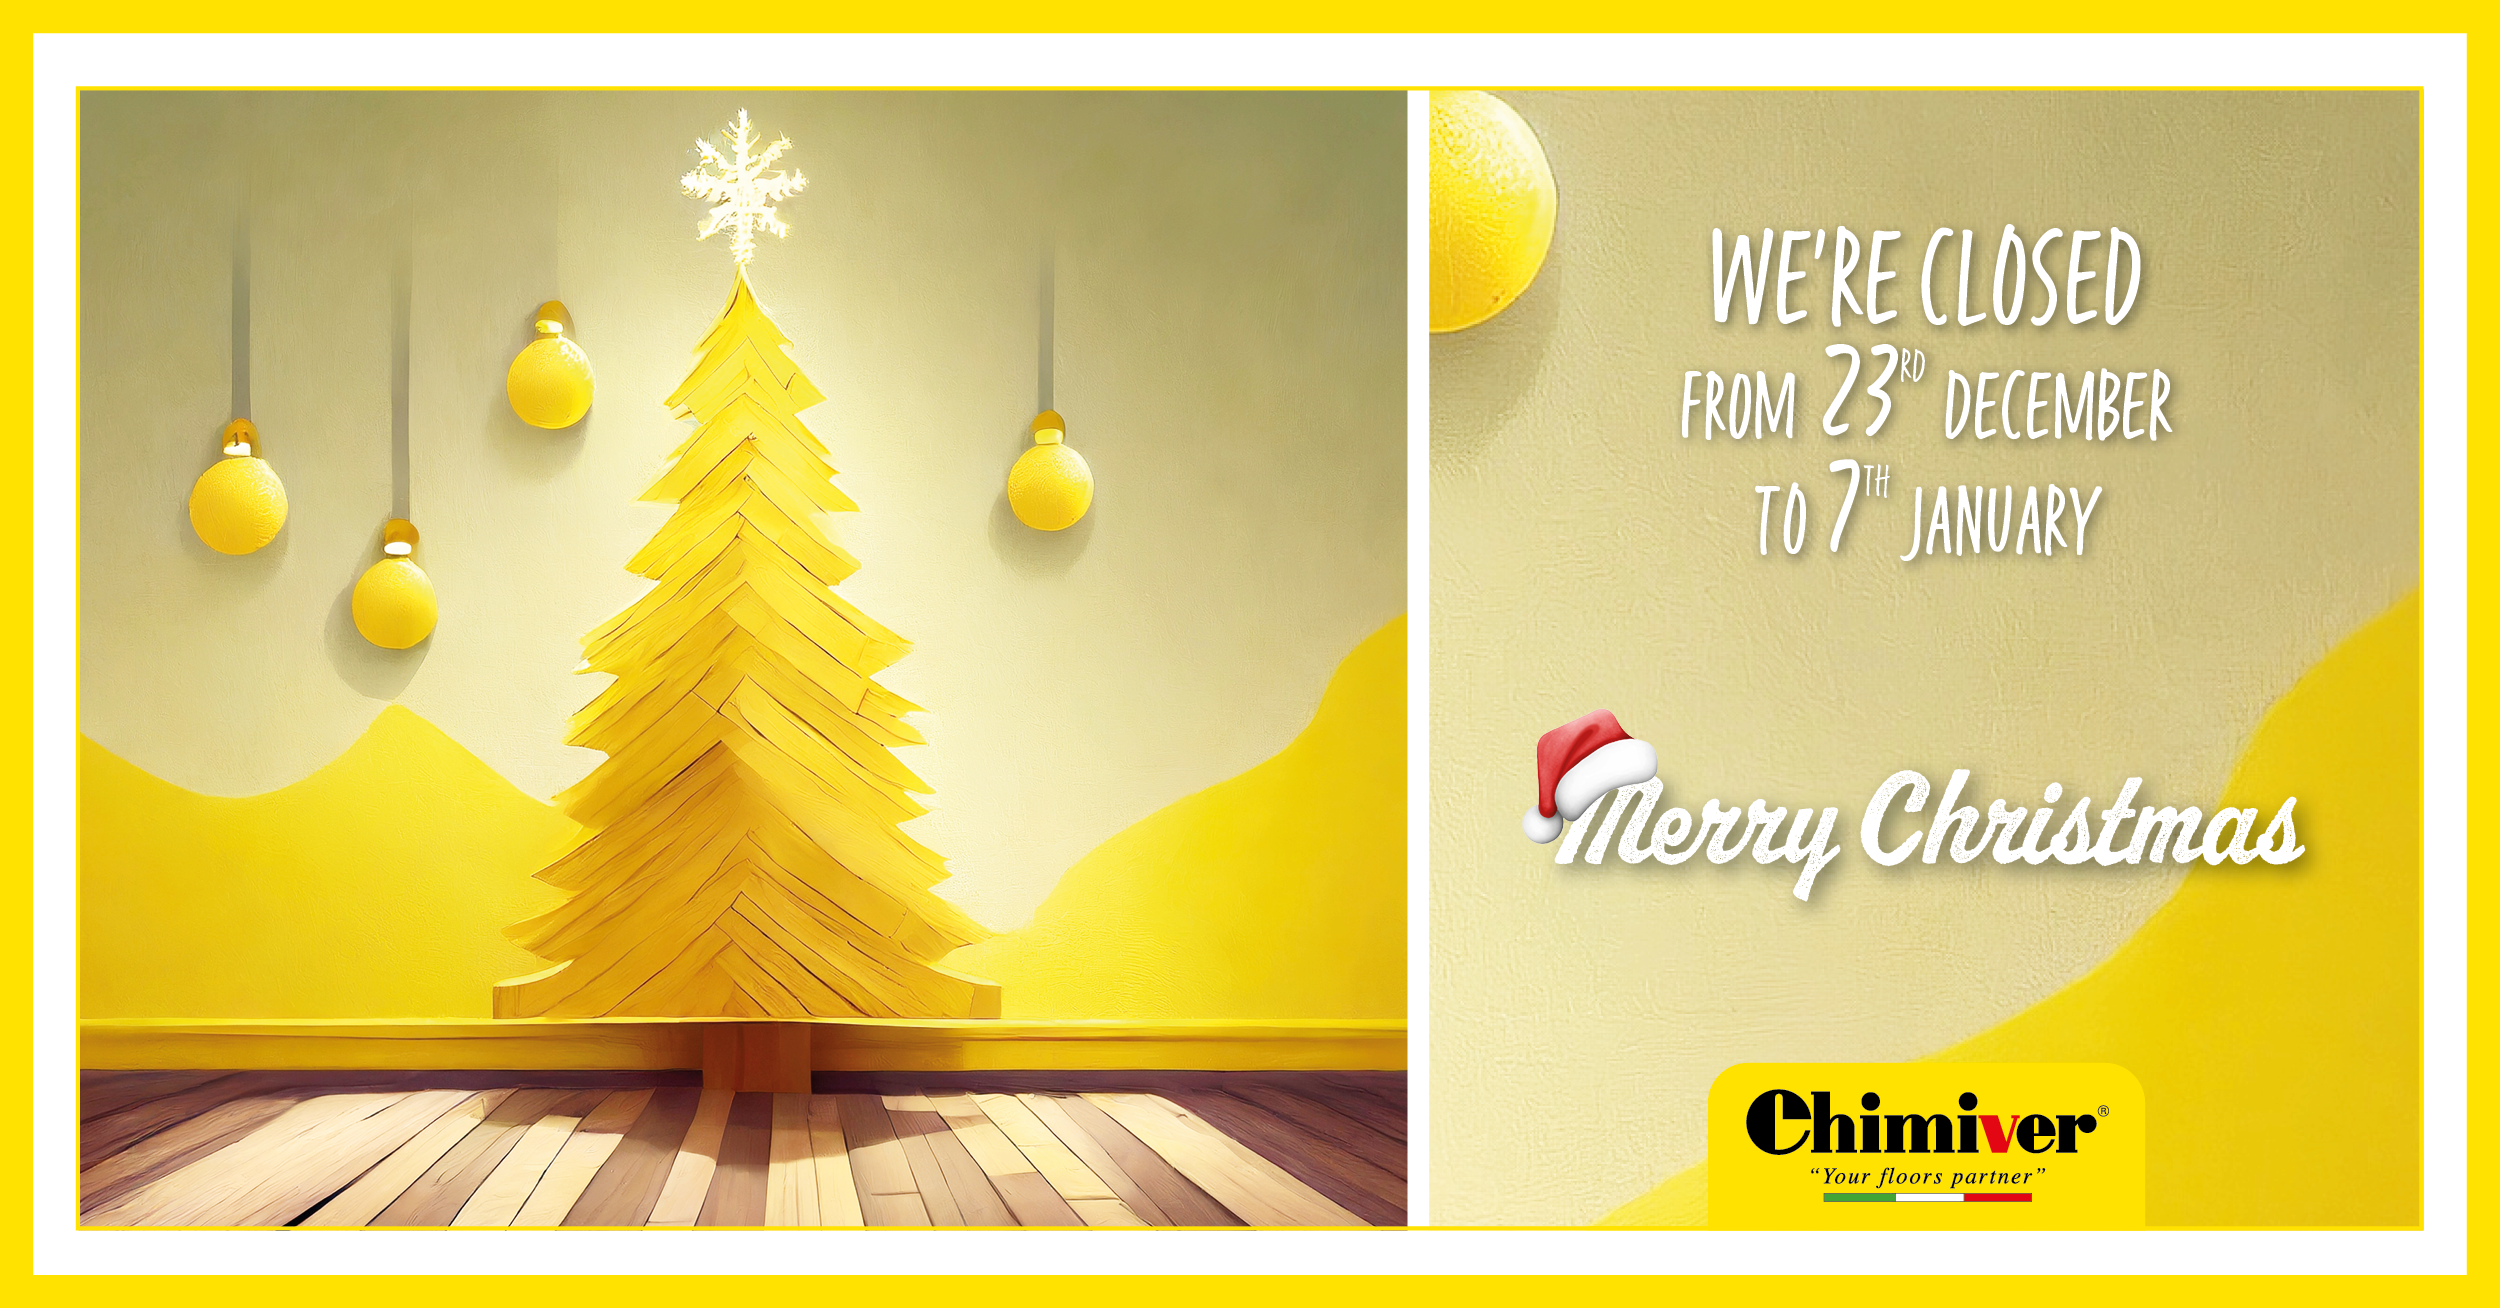 Merry Christmas from Chimiver!